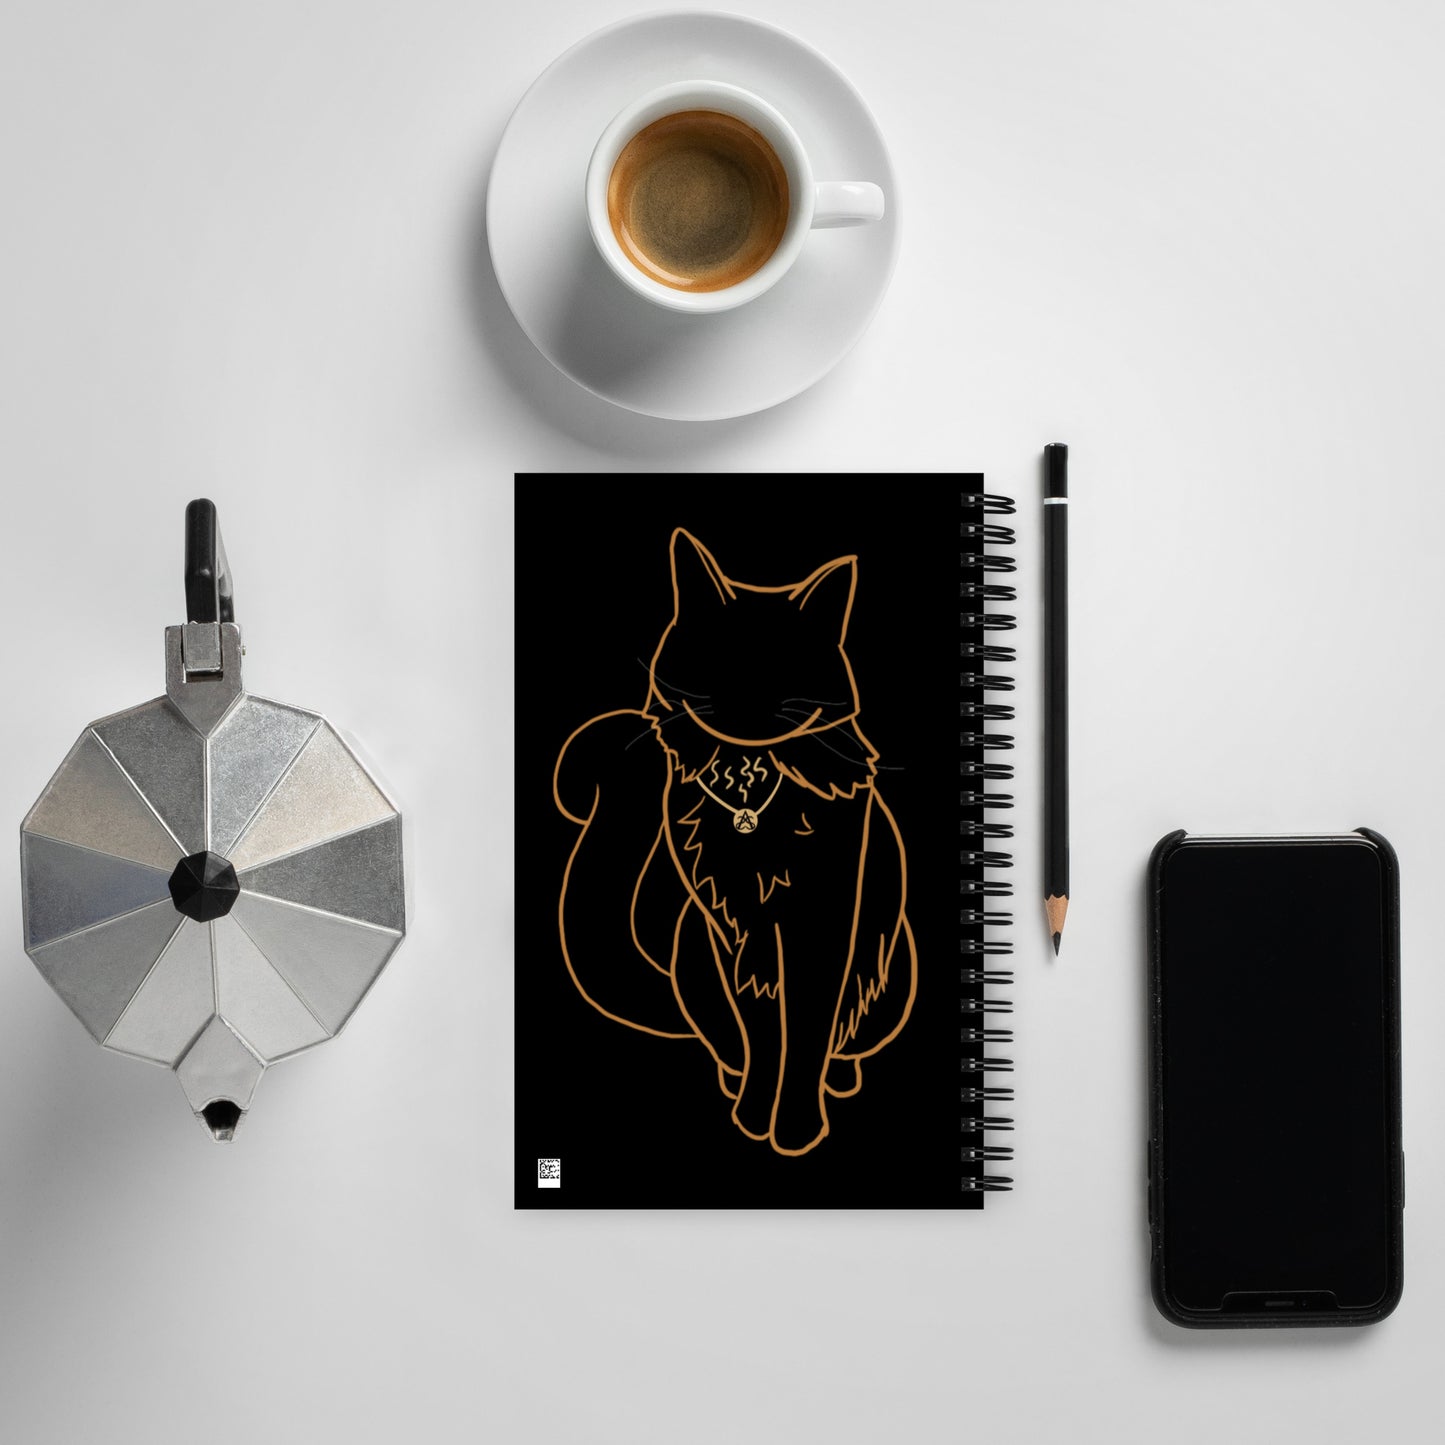 A black spiral notebook with the Rufus outline art by Aras Sivad is surrounded by a kettle, cup, pencil, and phone.